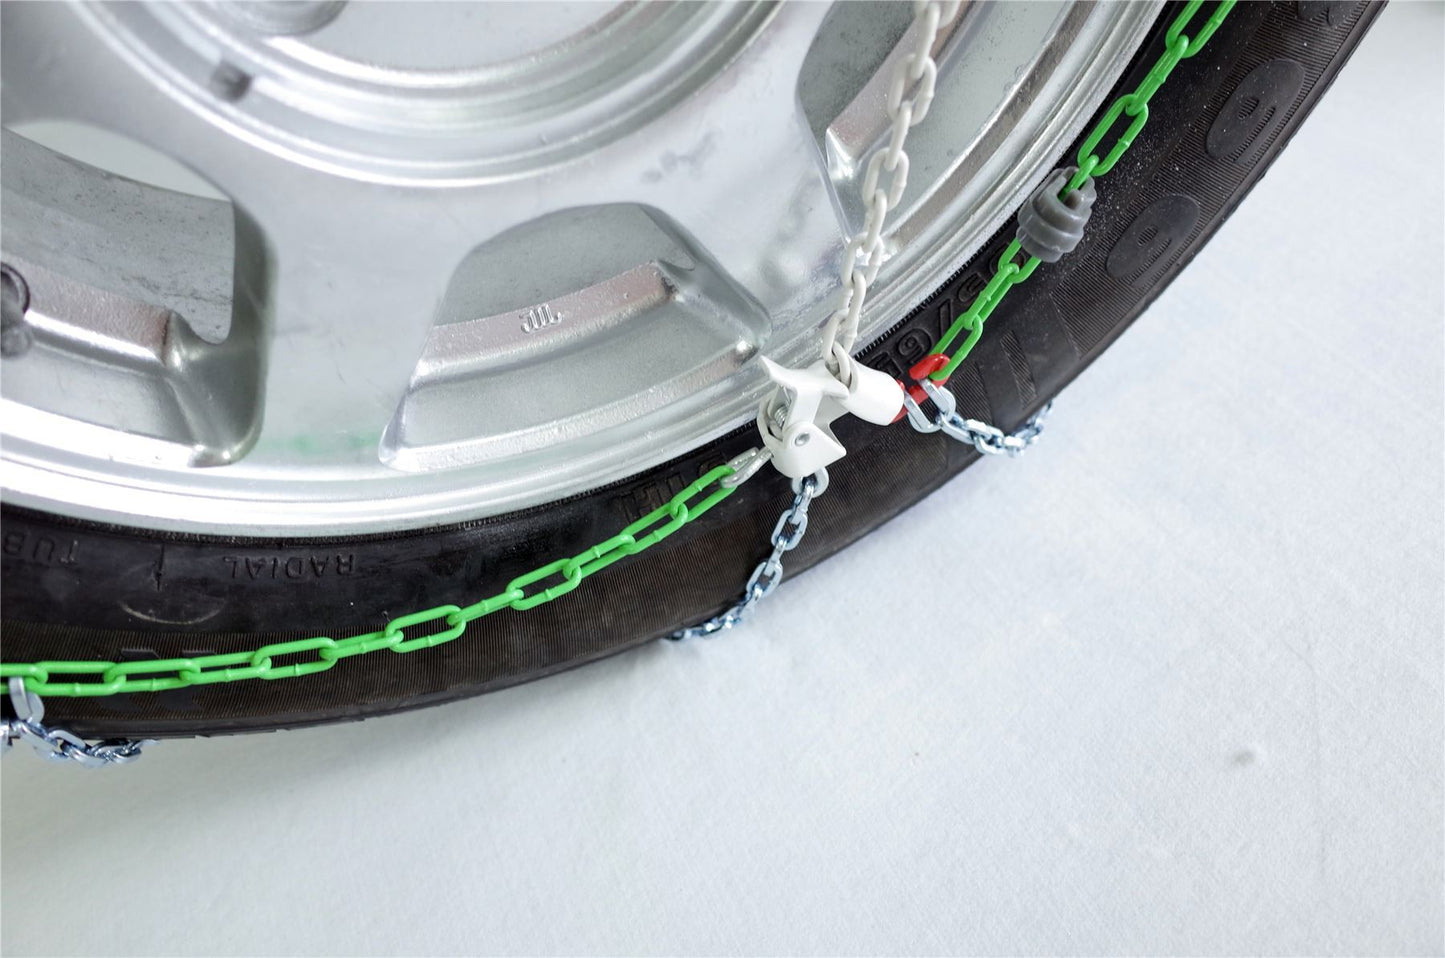 Green Valley TXR9 Winter 9mm Snow Chains - Car Tyre for 18" Wheels 265/35-18